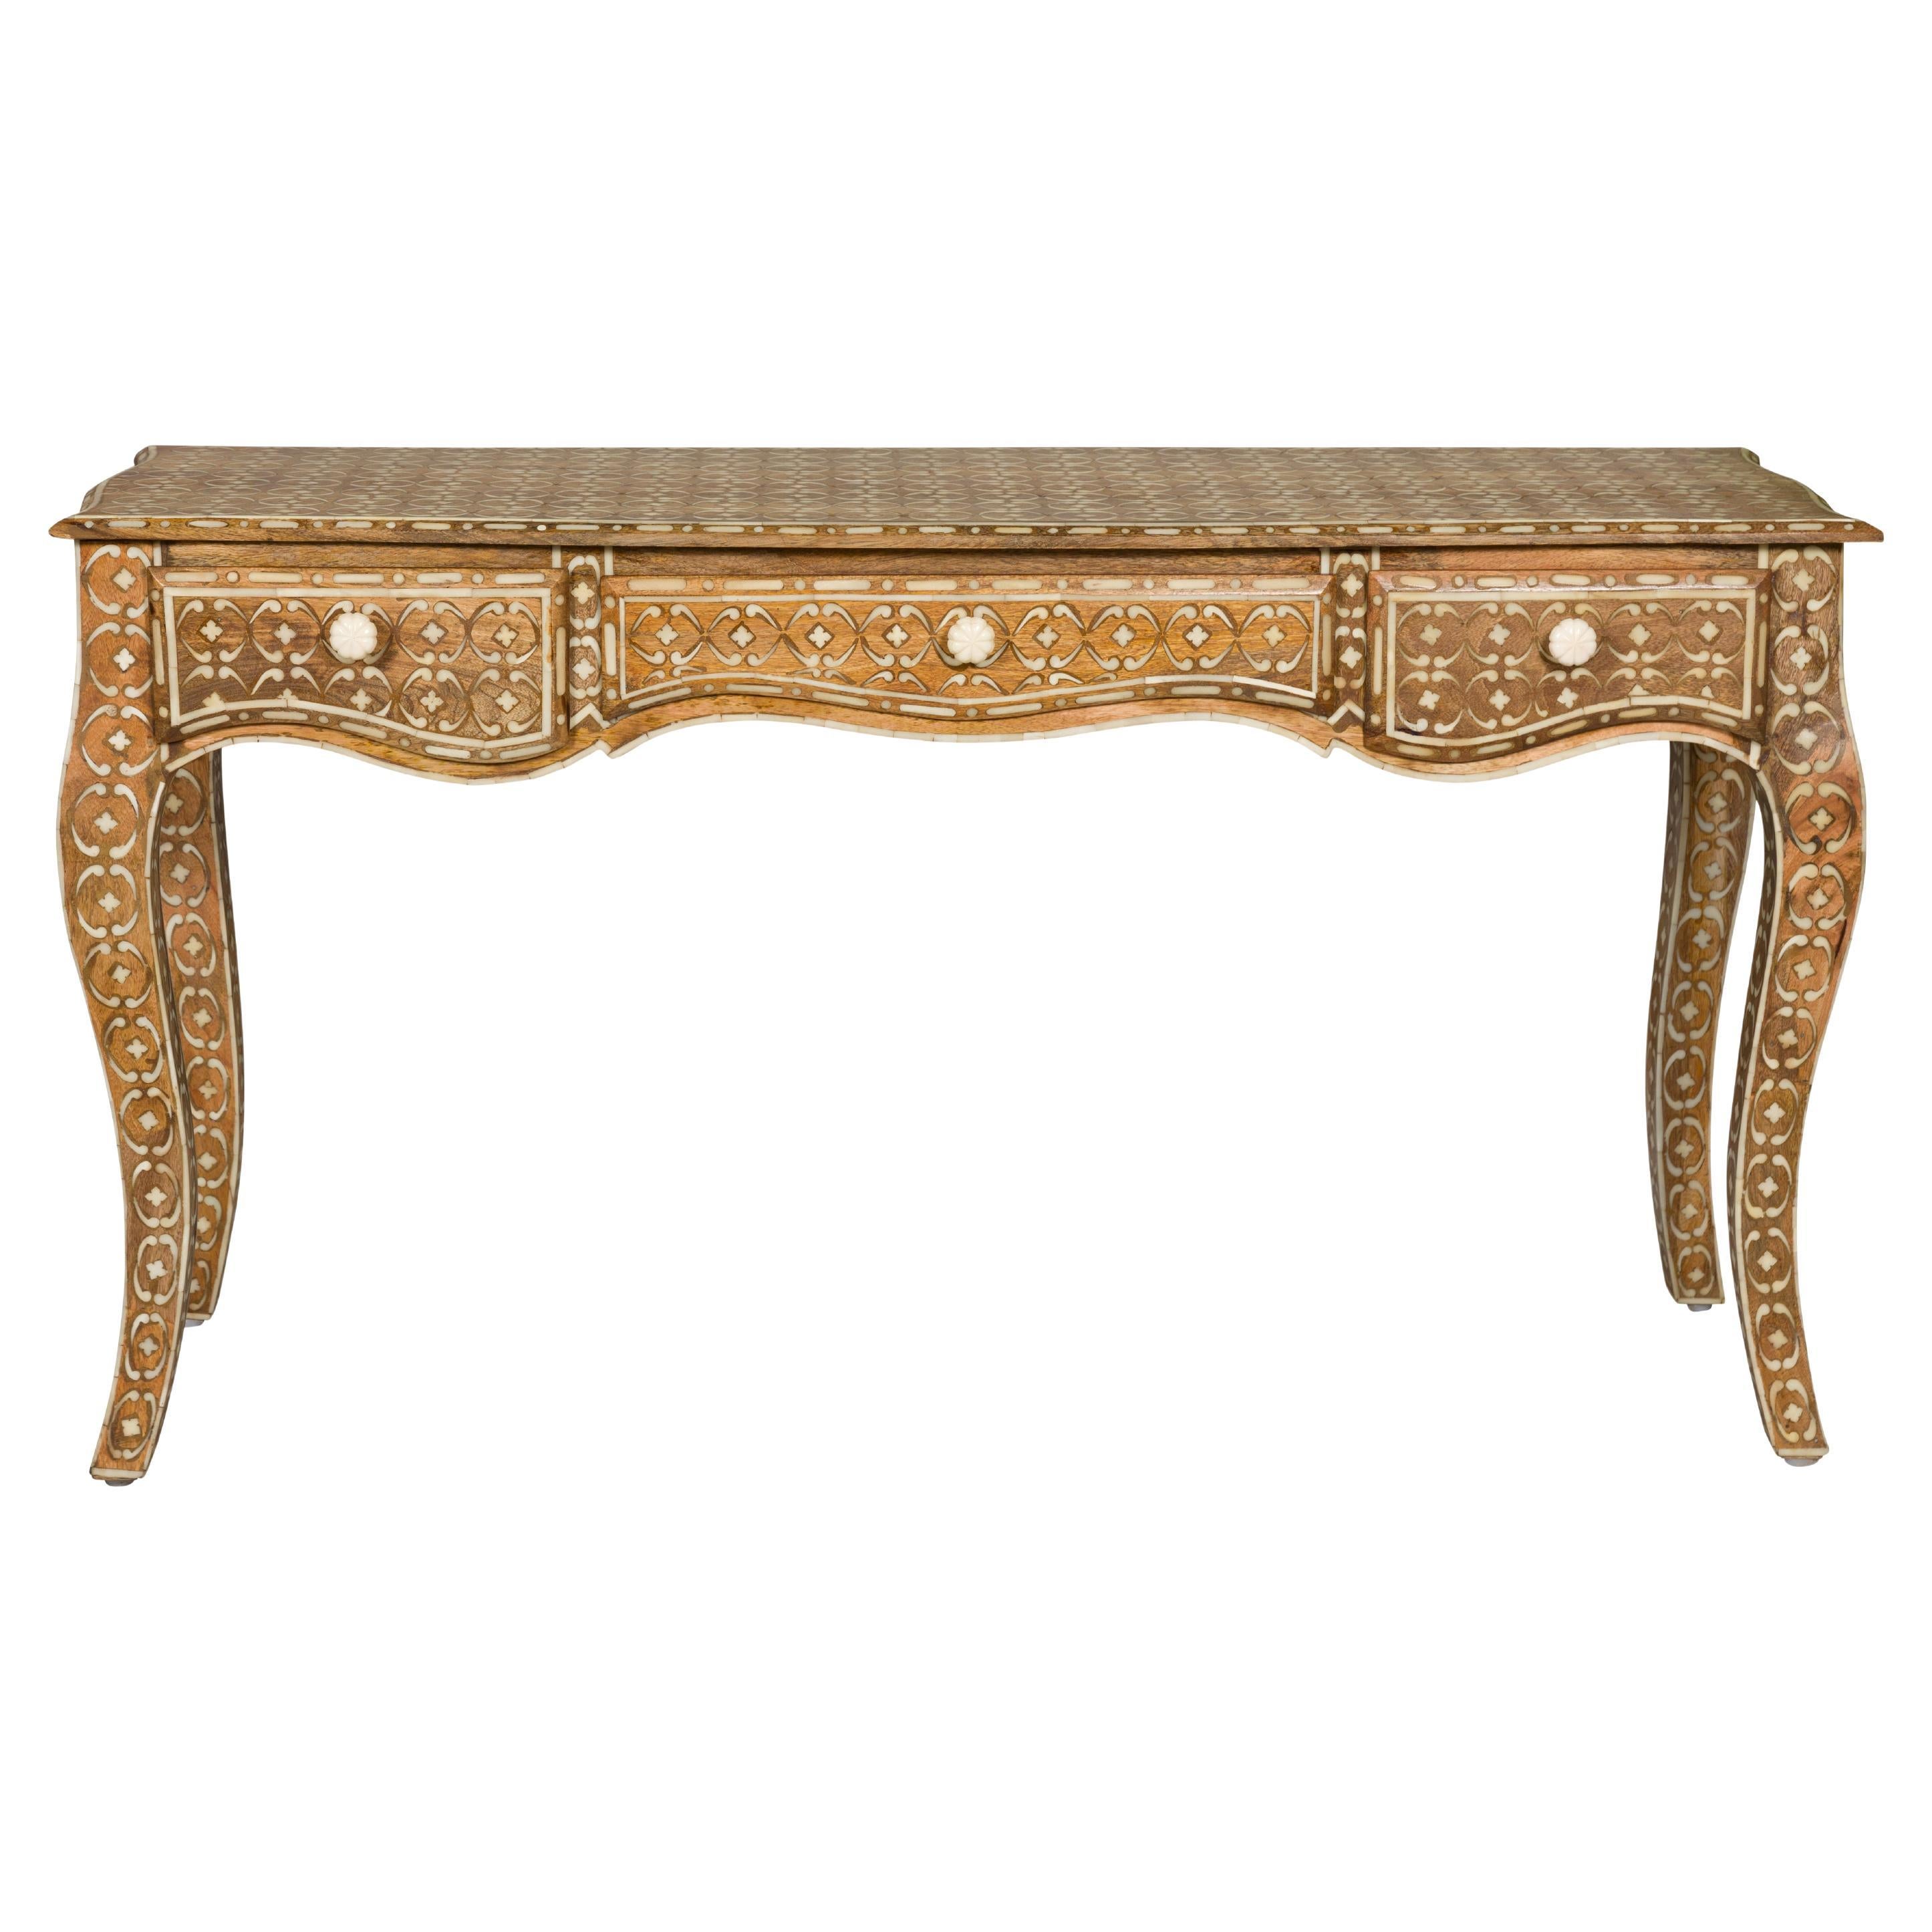 Anglo-Indian Louis XV Style Console Table with Three Drawers and Cabriole Legs